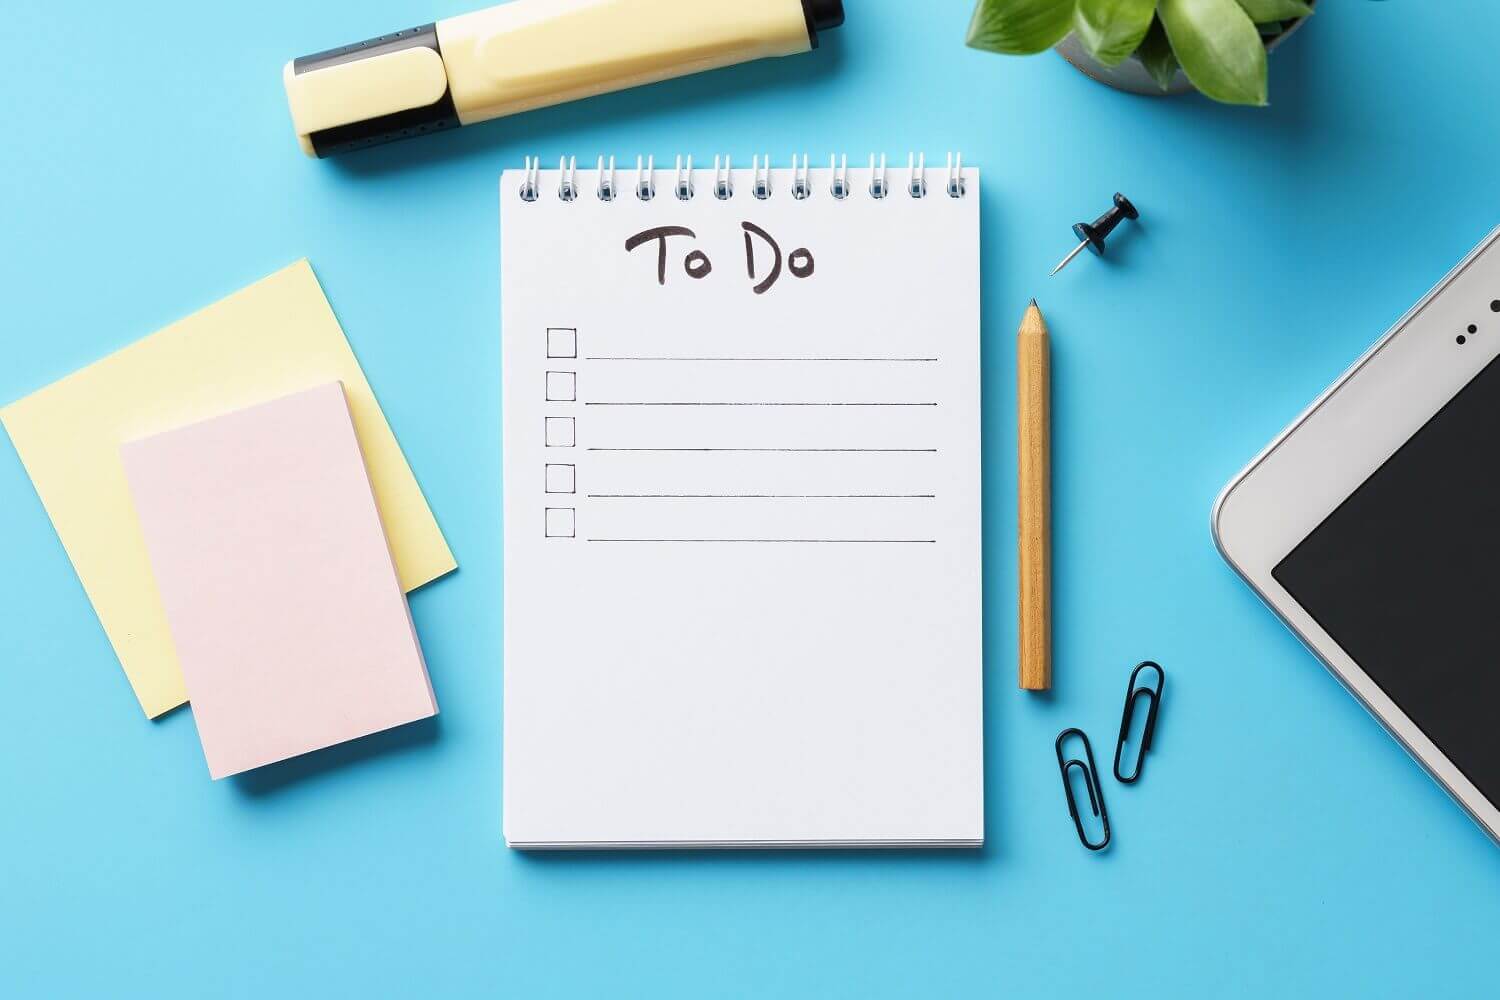 https://www.amitree.com/wp-content/uploads/2021/08/the-pros-and-cons-of-paper-to-do-lists.jpeg